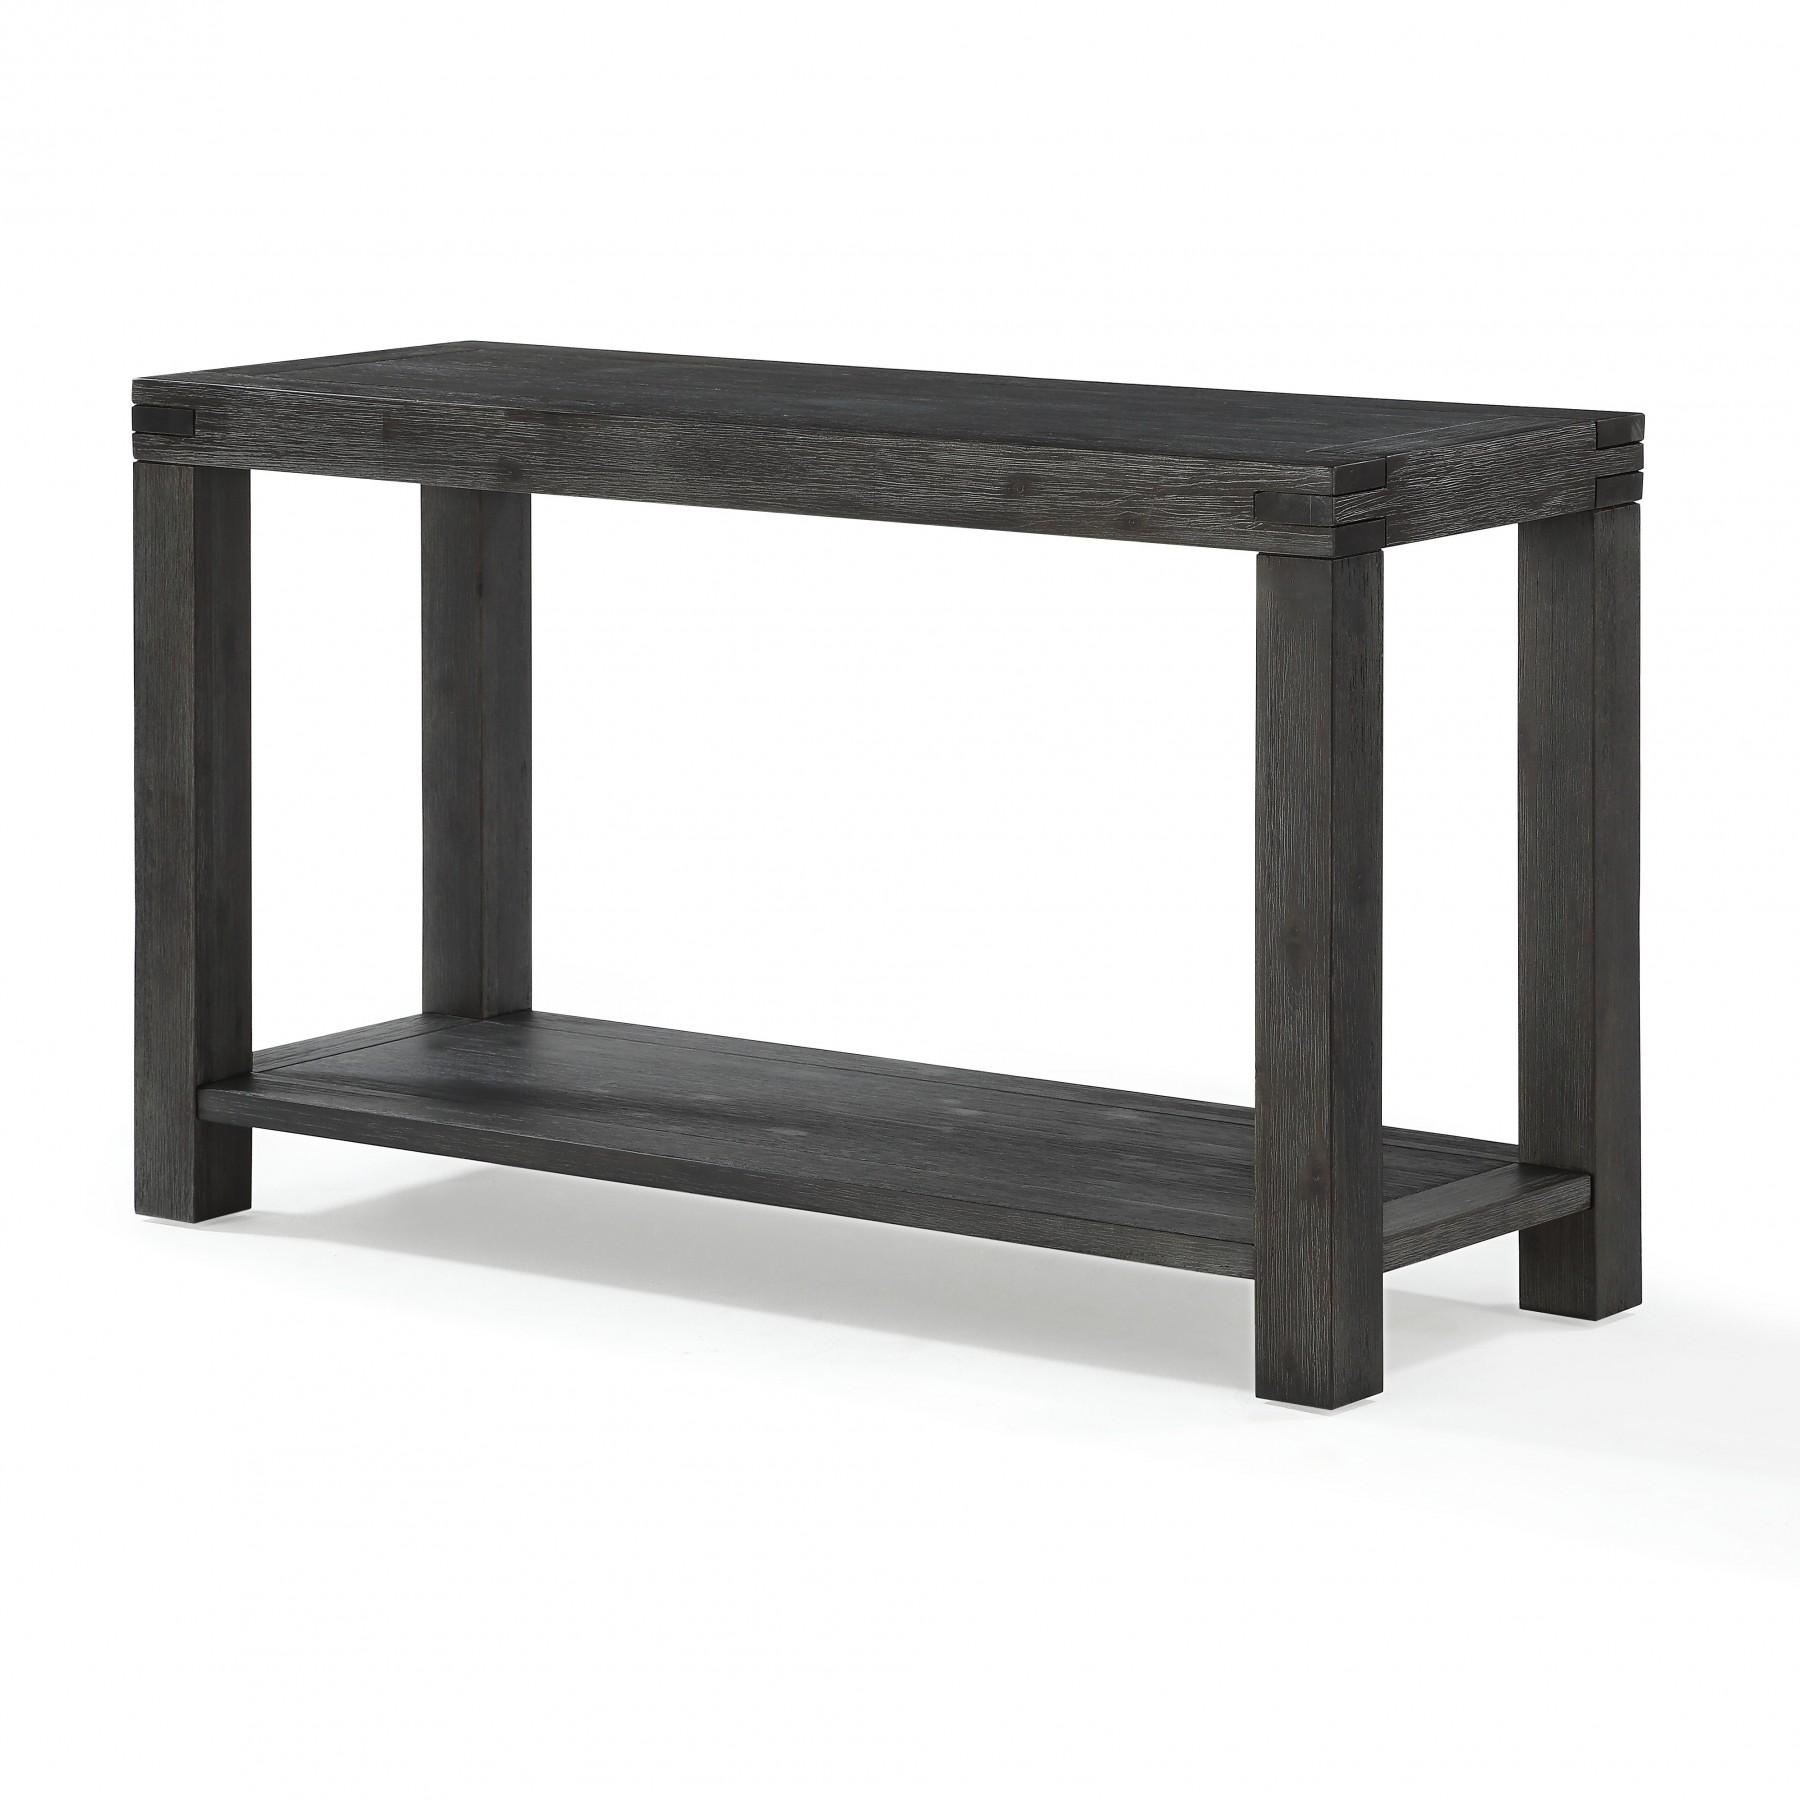 Rustic Console Table MEADOW 3FT323 in Graphite 